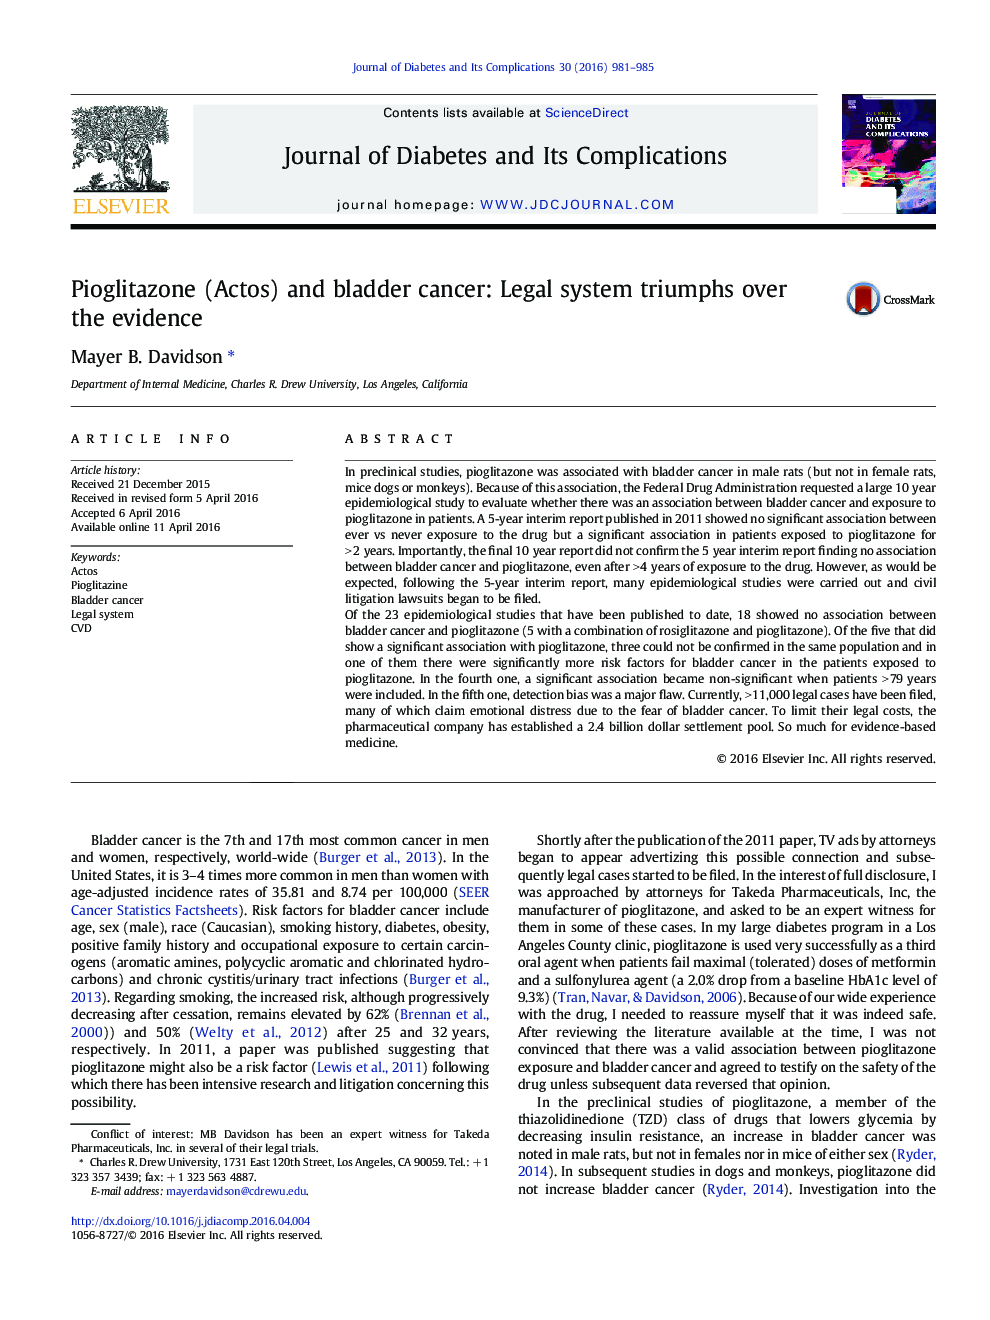 Pioglitazone (Actos) and bladder cancer: Legal system triumphs over the evidence